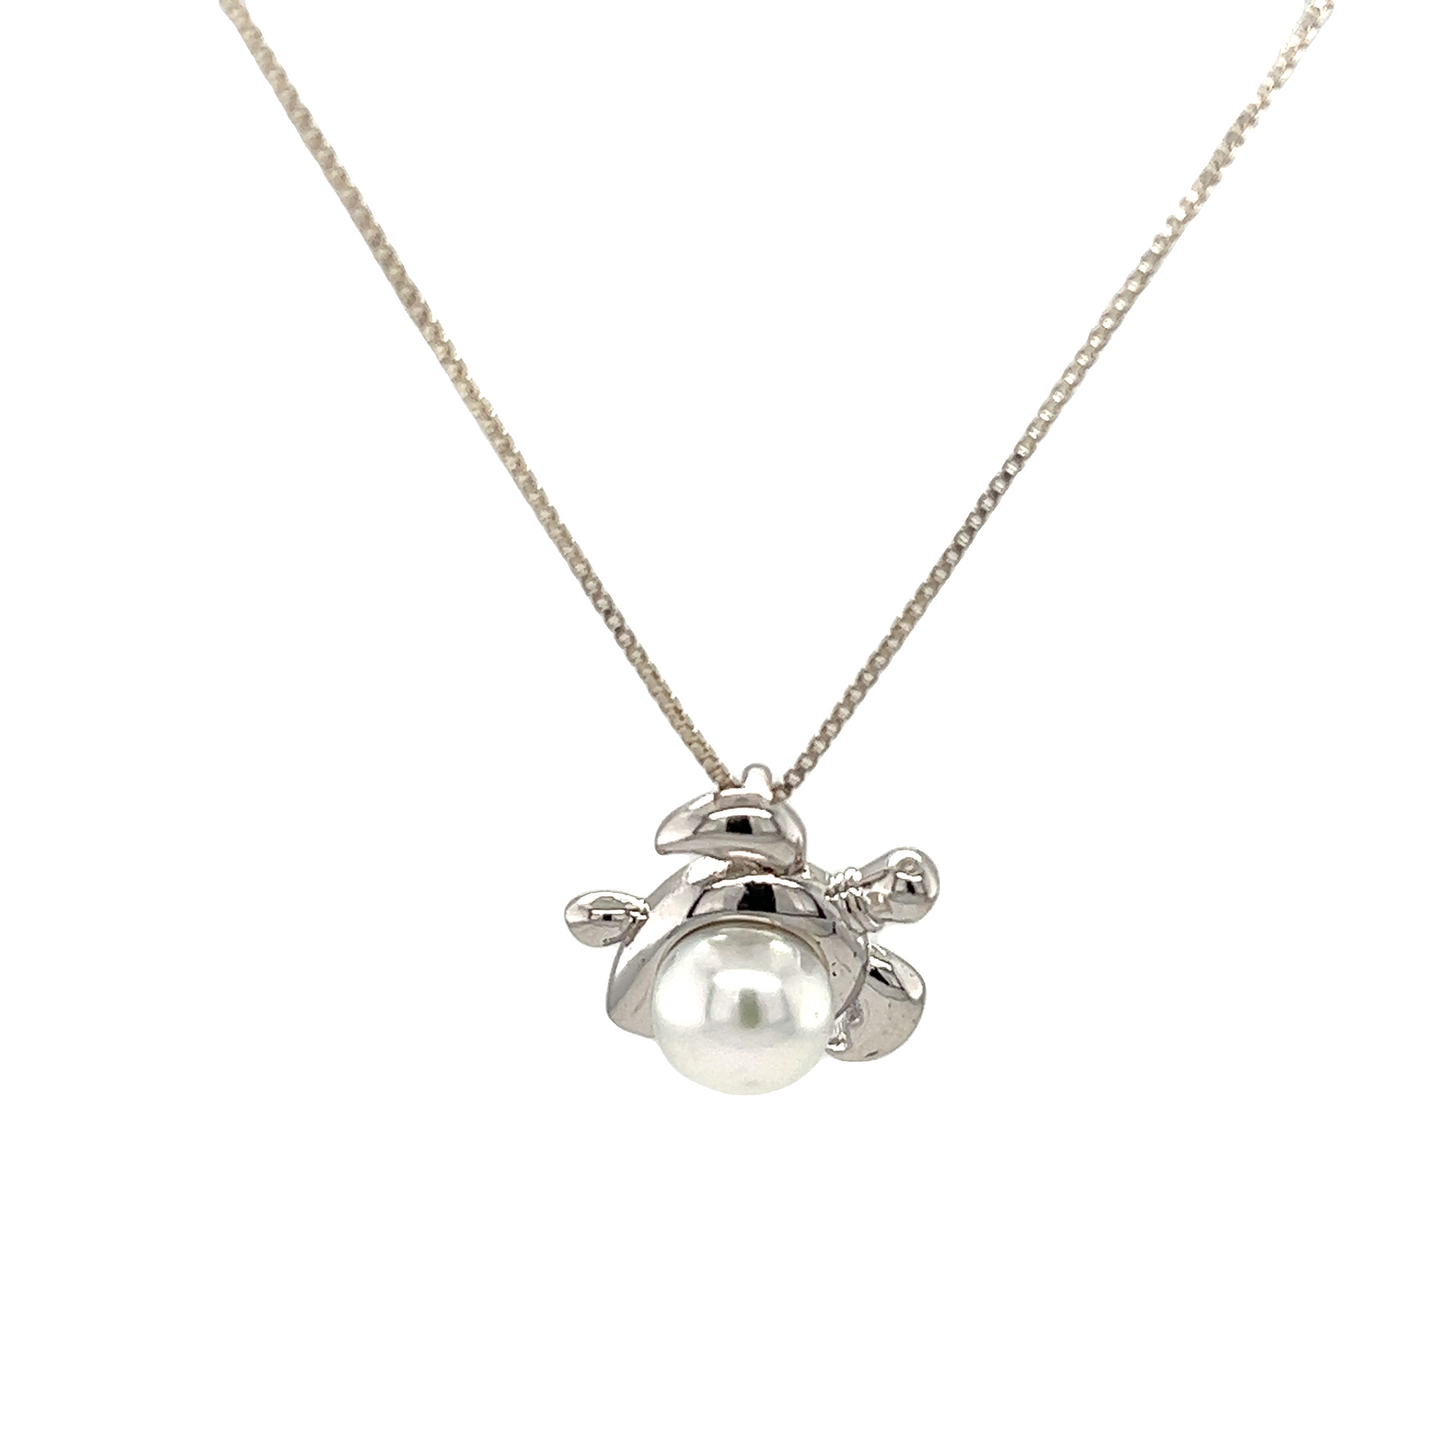 A Charming Pearl Sea Turtle Pendant embellished with a white shell pearl accent, perfect for ocean enthusiasts from Super Silver.